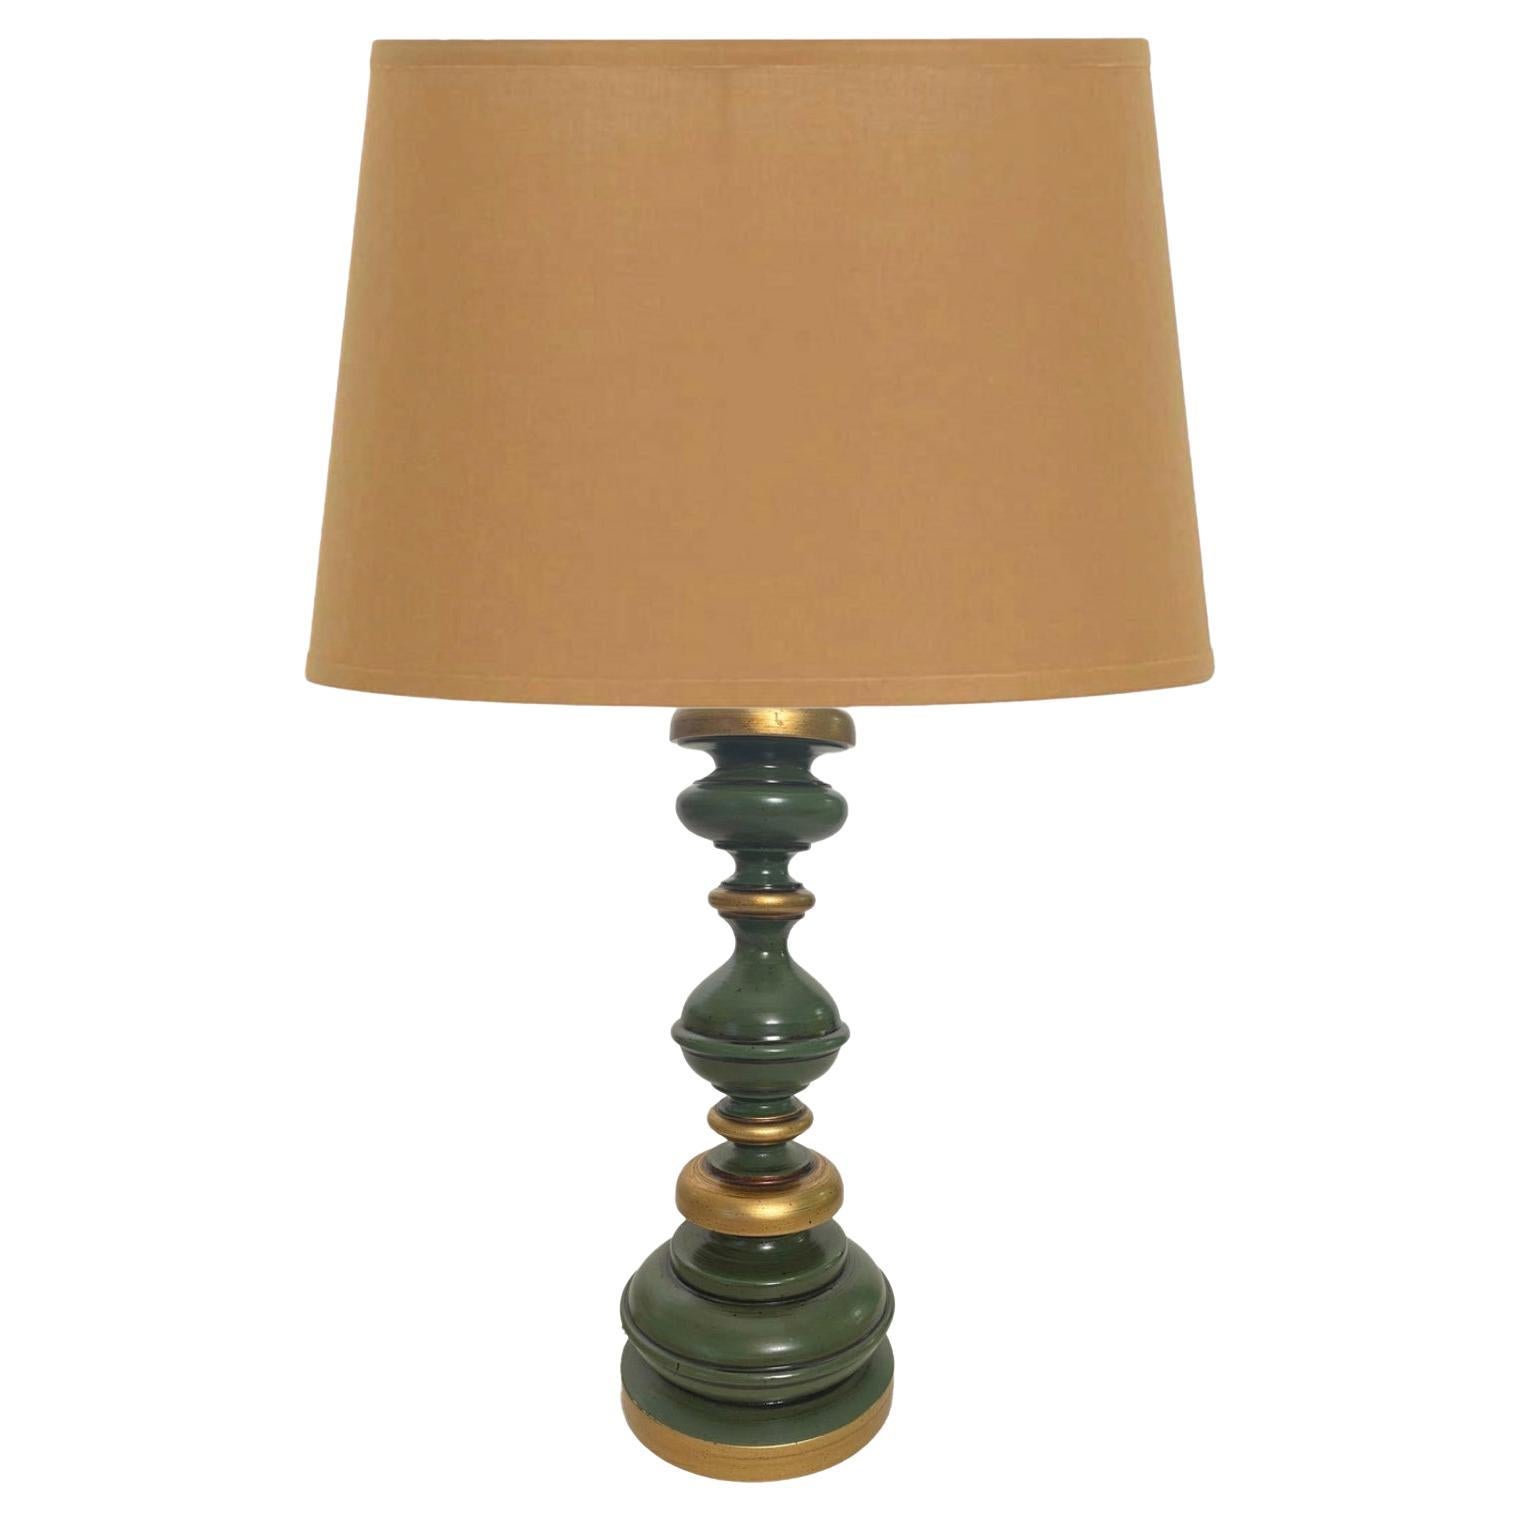 Wood Table Lamp, Made in France, Green Color, Circa 1970 For Sale